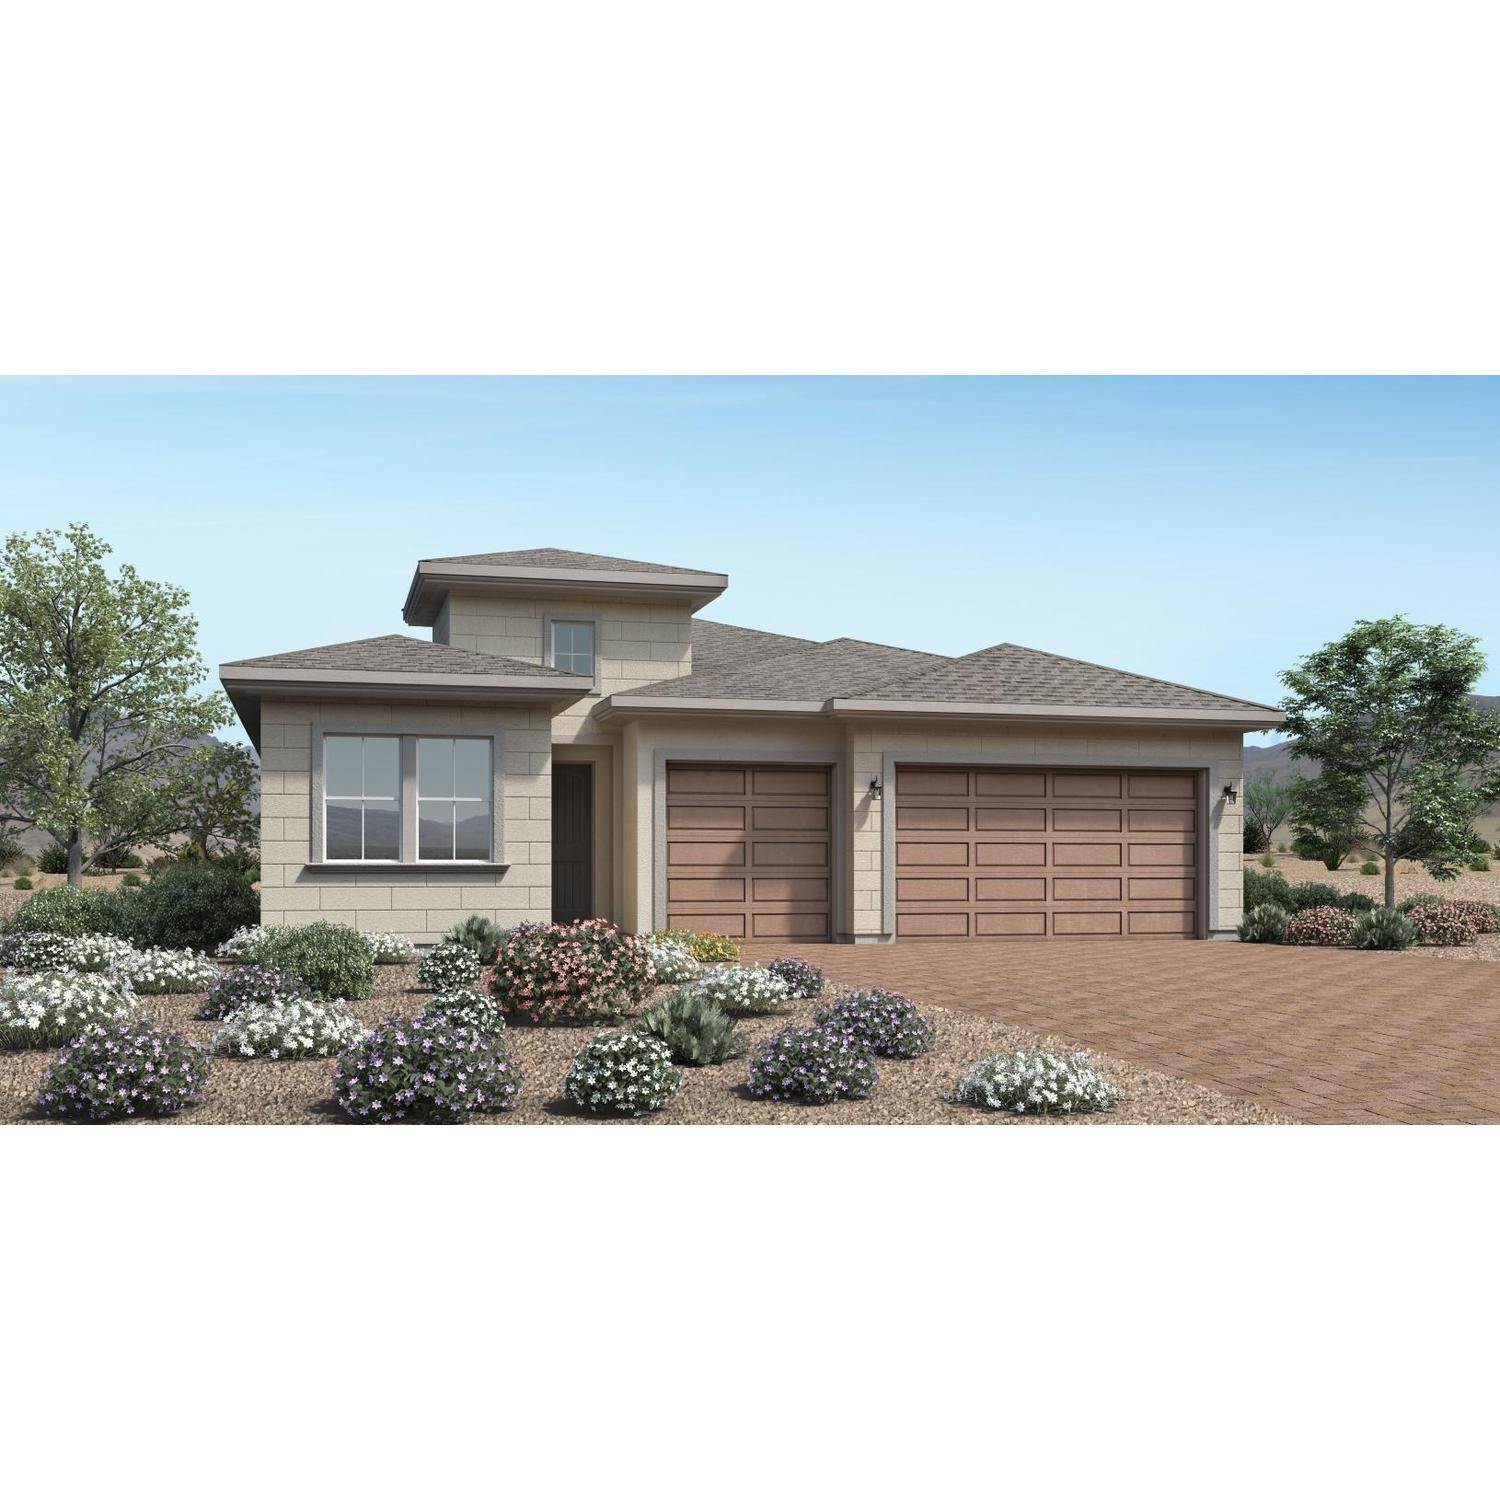 Single Family for Sale at Regency At Stonebrook - Sage Meadow Collection 7481 Rustic Sky Ct, Sparks, NV 89436